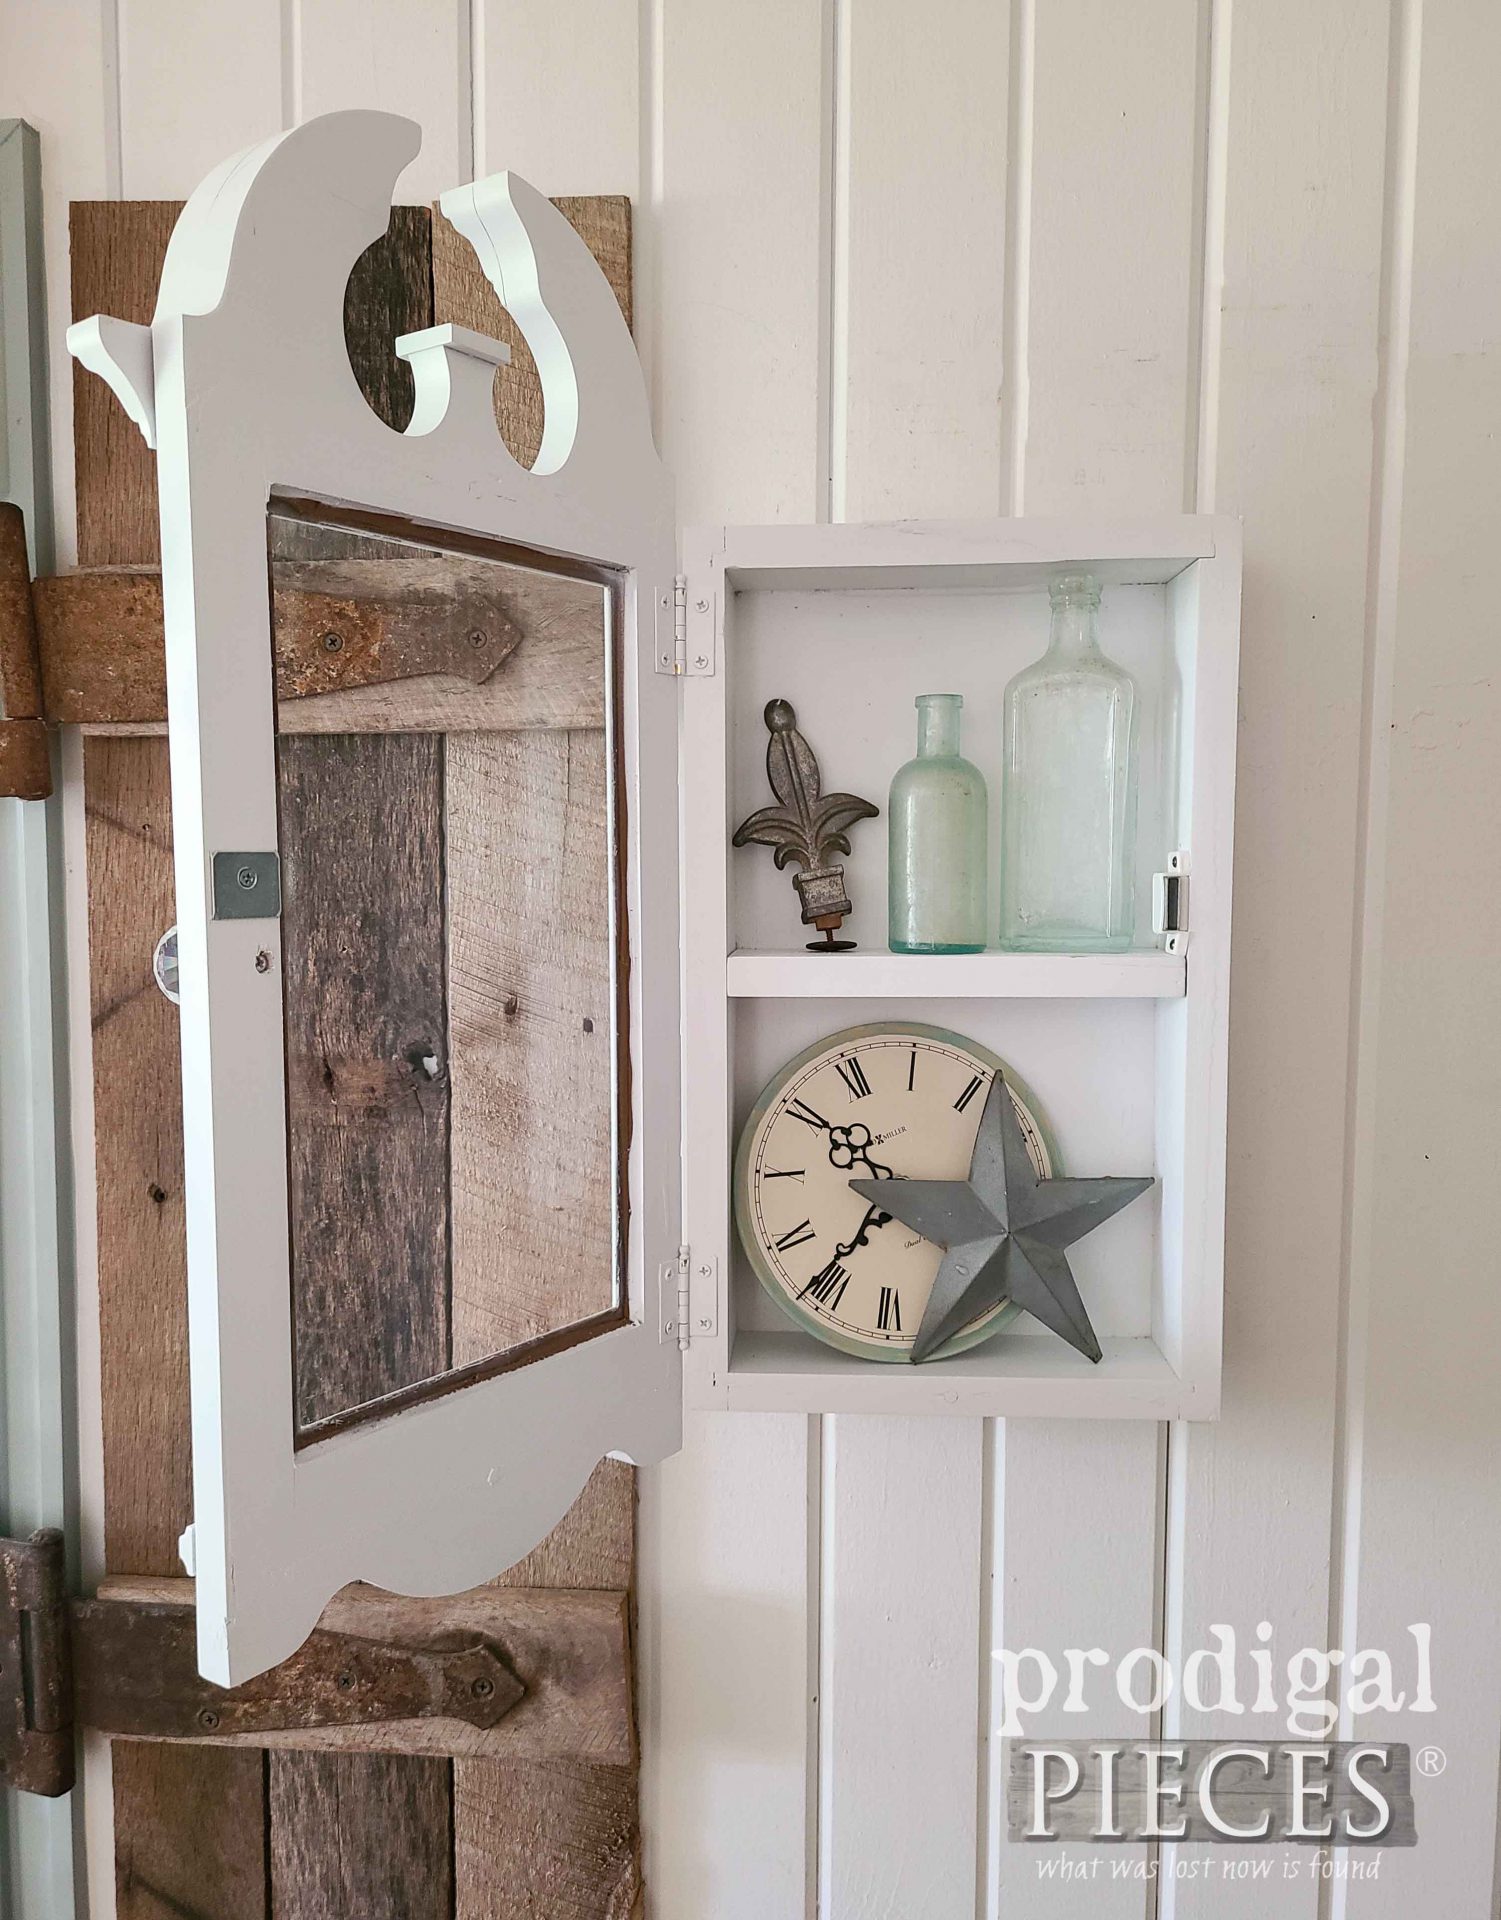 Wall Cabinet Glass Door Open from Reclaimed Wall Clock by Larissa of Prodigal Pieces | prodigalpieces.com #prodigalpieces #upcycled #vintage #clock